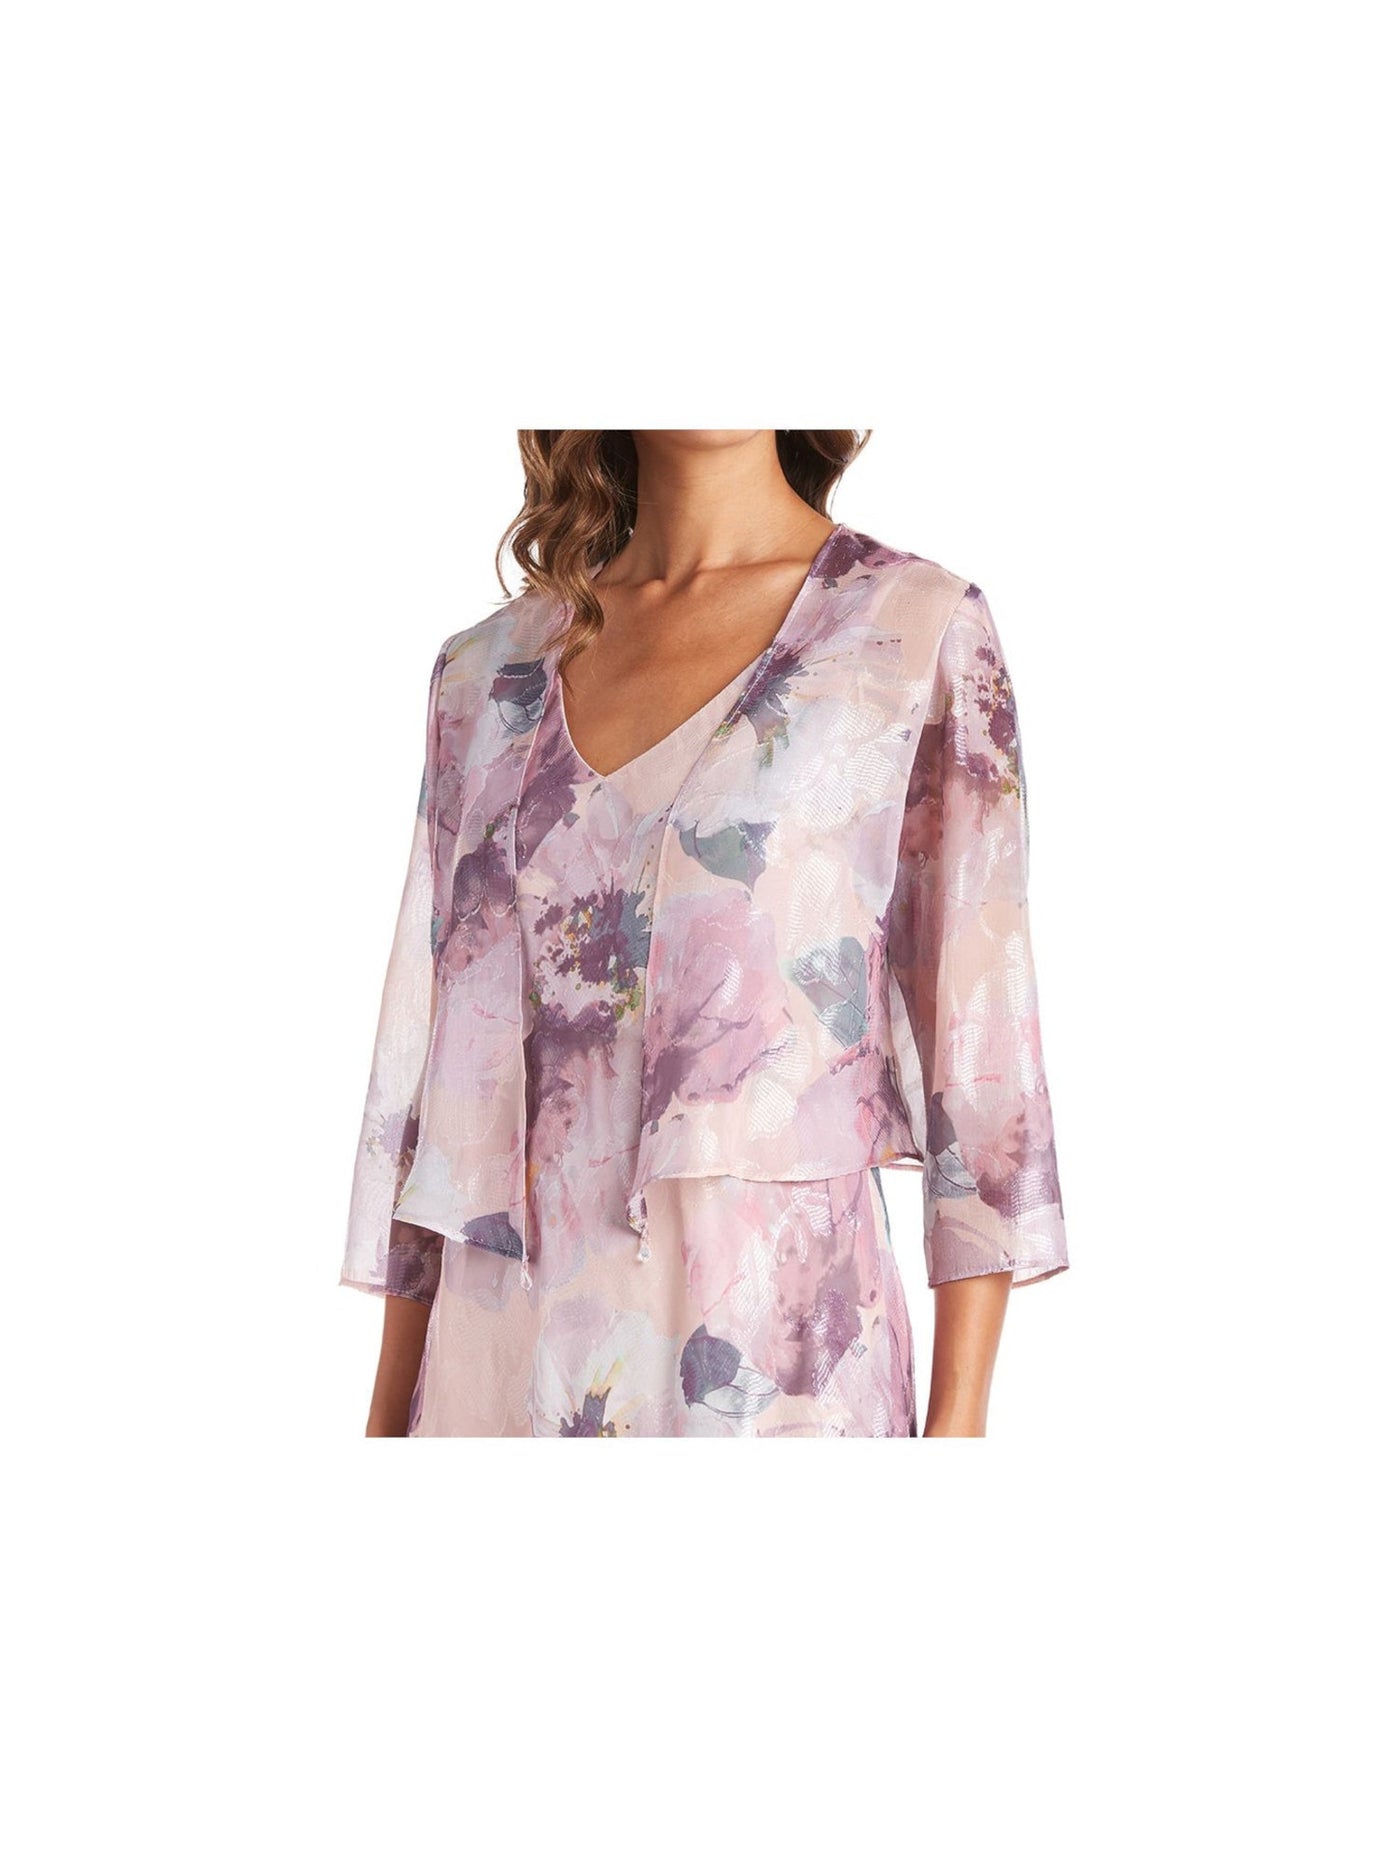 R&M RICHARDS Womens Pink Sheer Floral 3/4 Sleeve Open Front Wear To Work Shrug Cardigan Petites 8P